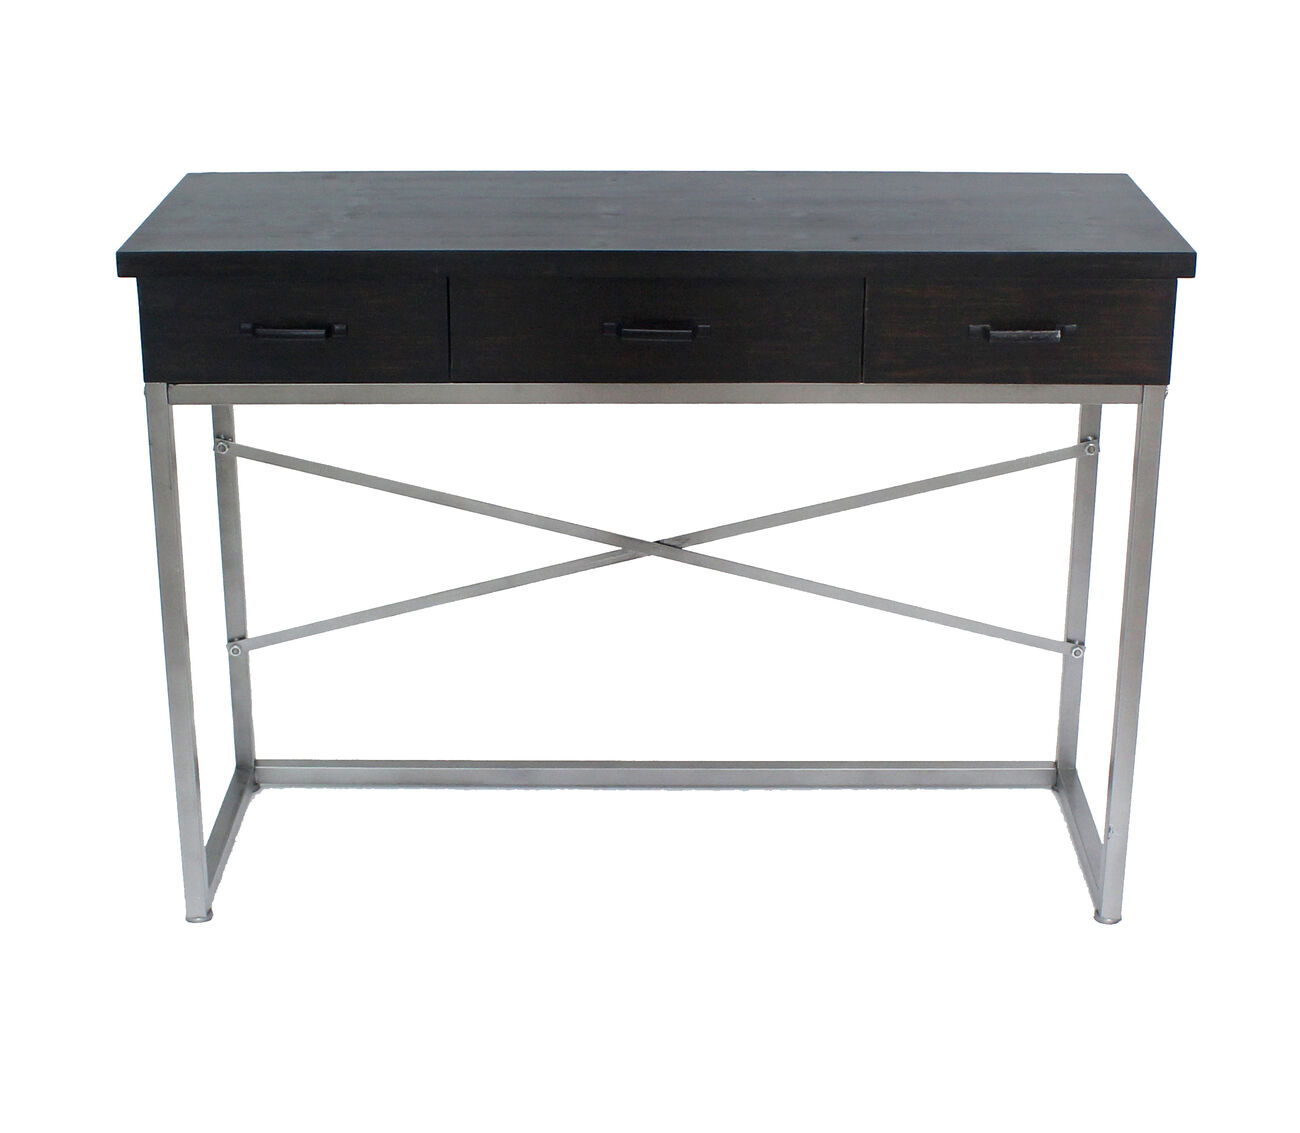 Wooden Console Table with Metal Base and 3 Drawers, Brown and Silver